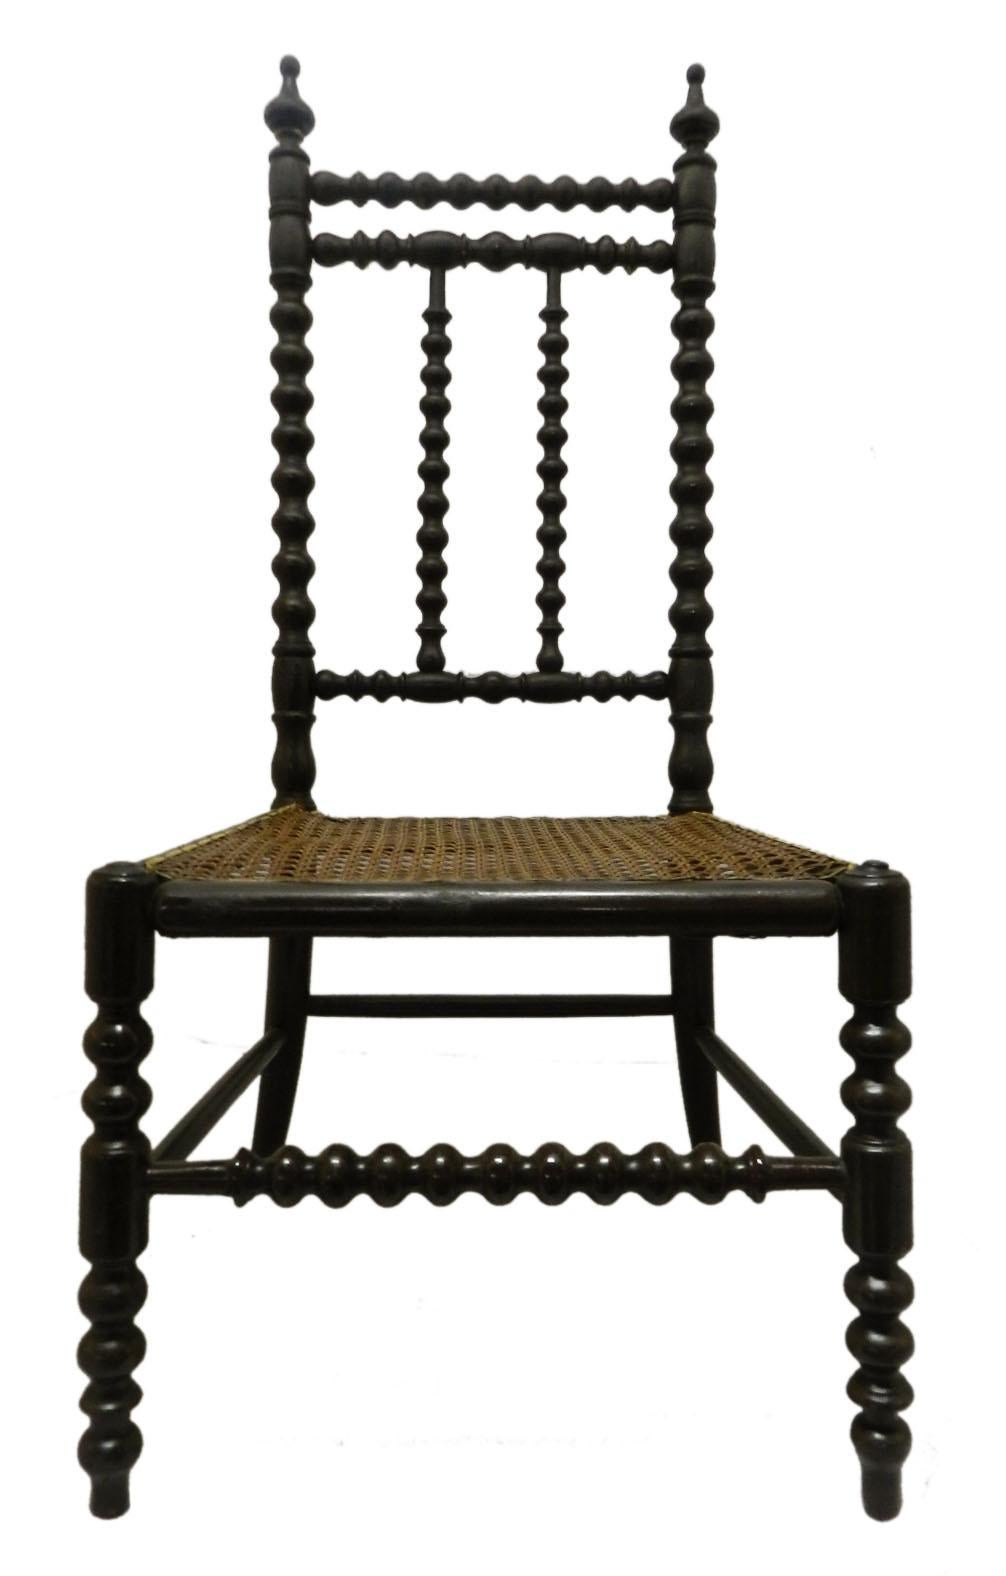 French cane and bobbin child's chair, late 19th century
Bobbin turned frame and bergere caned seat.
Original dark brown, black frame
Very decorative
Good condition with minor signs of age.


 